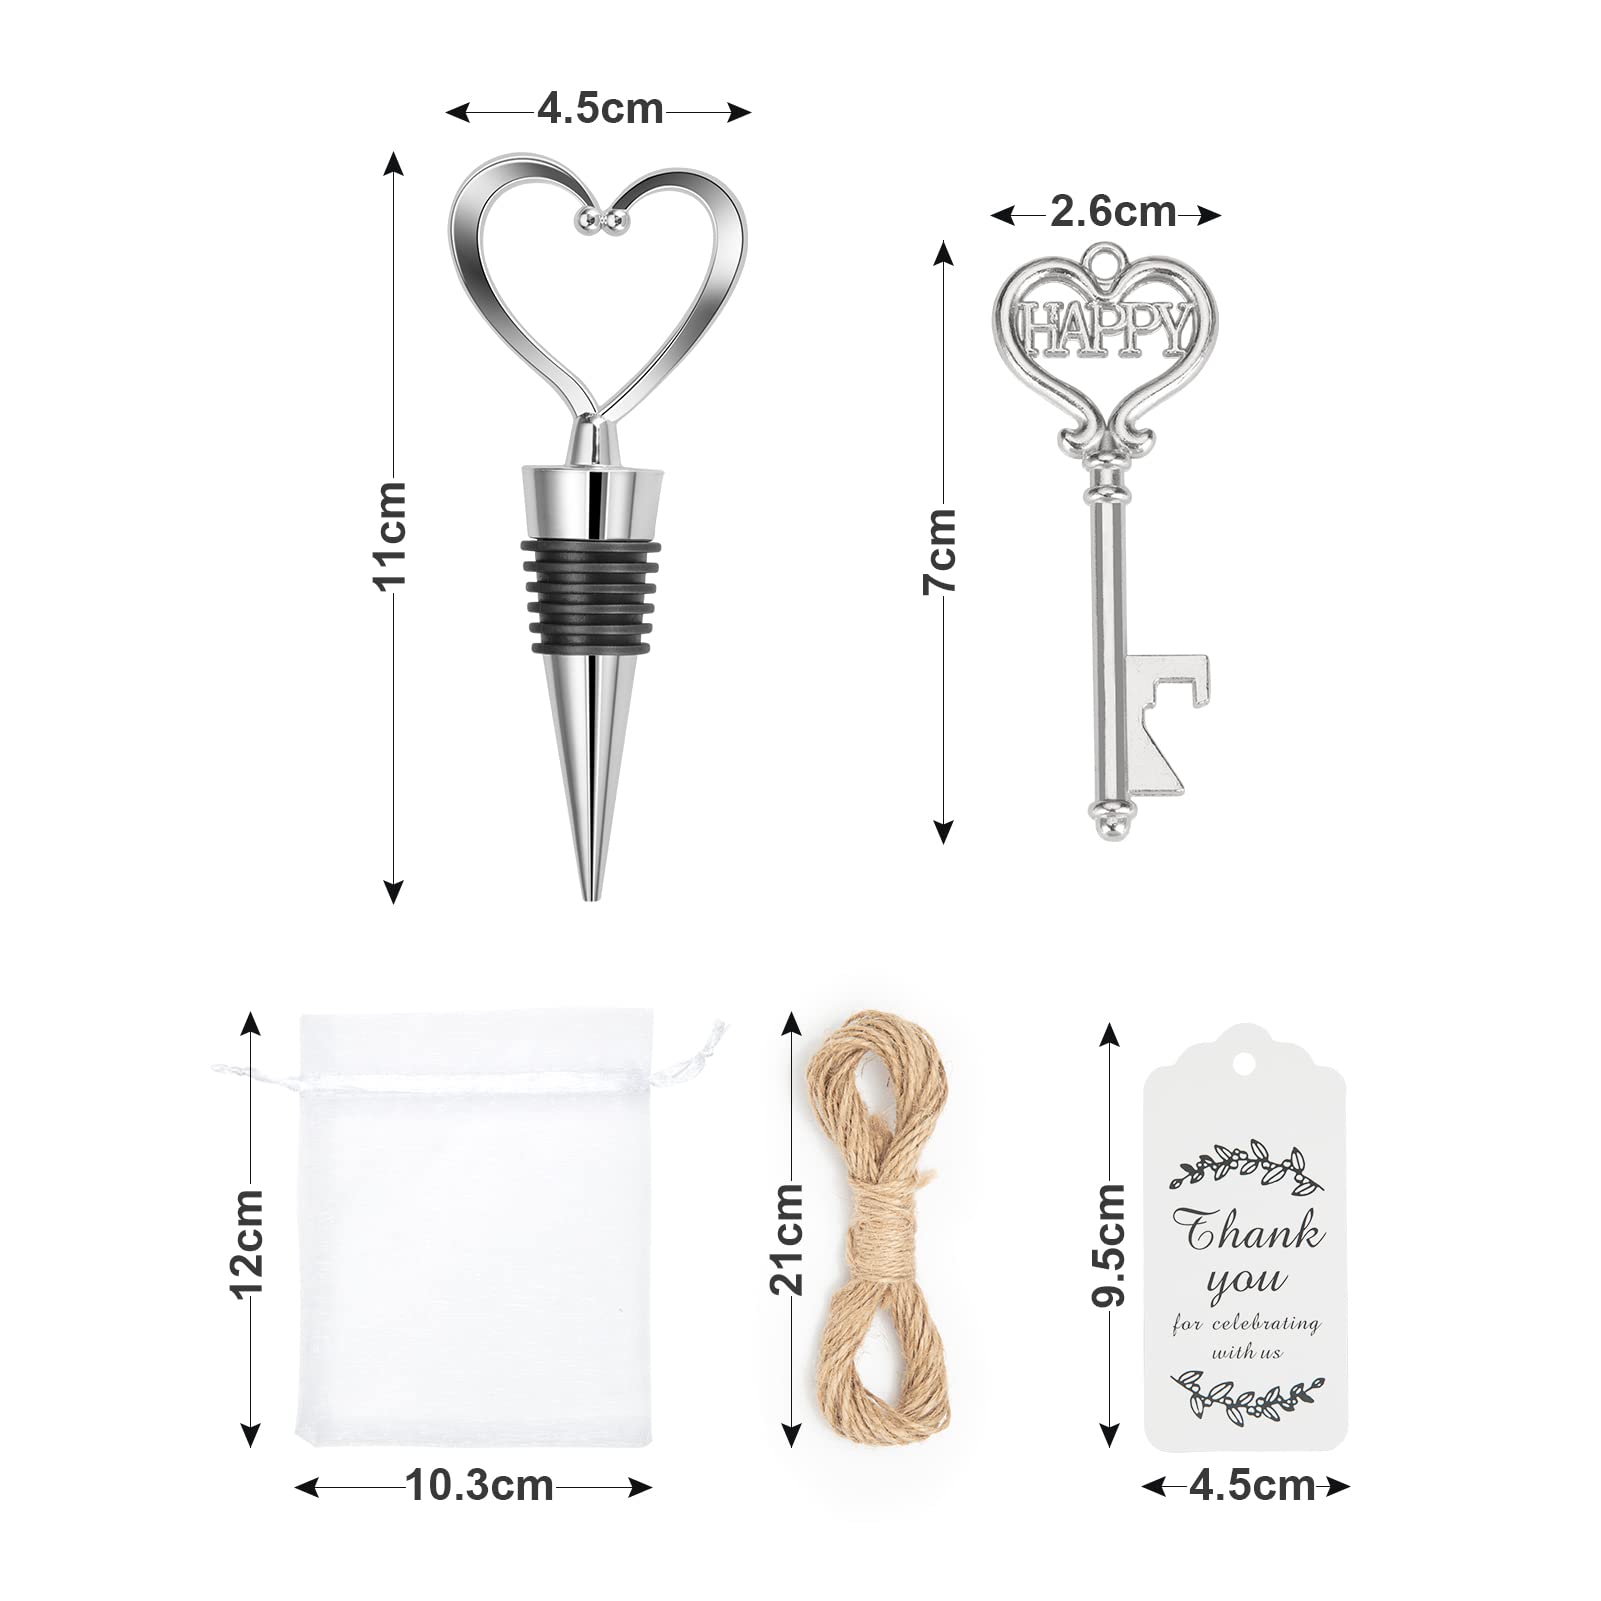 36 Pieces Heart Shape Wine Stopper Wedding Bridal Favor for Guests, with 36 Pieces Wine Bottle Opener, Wedding Favors for Guests